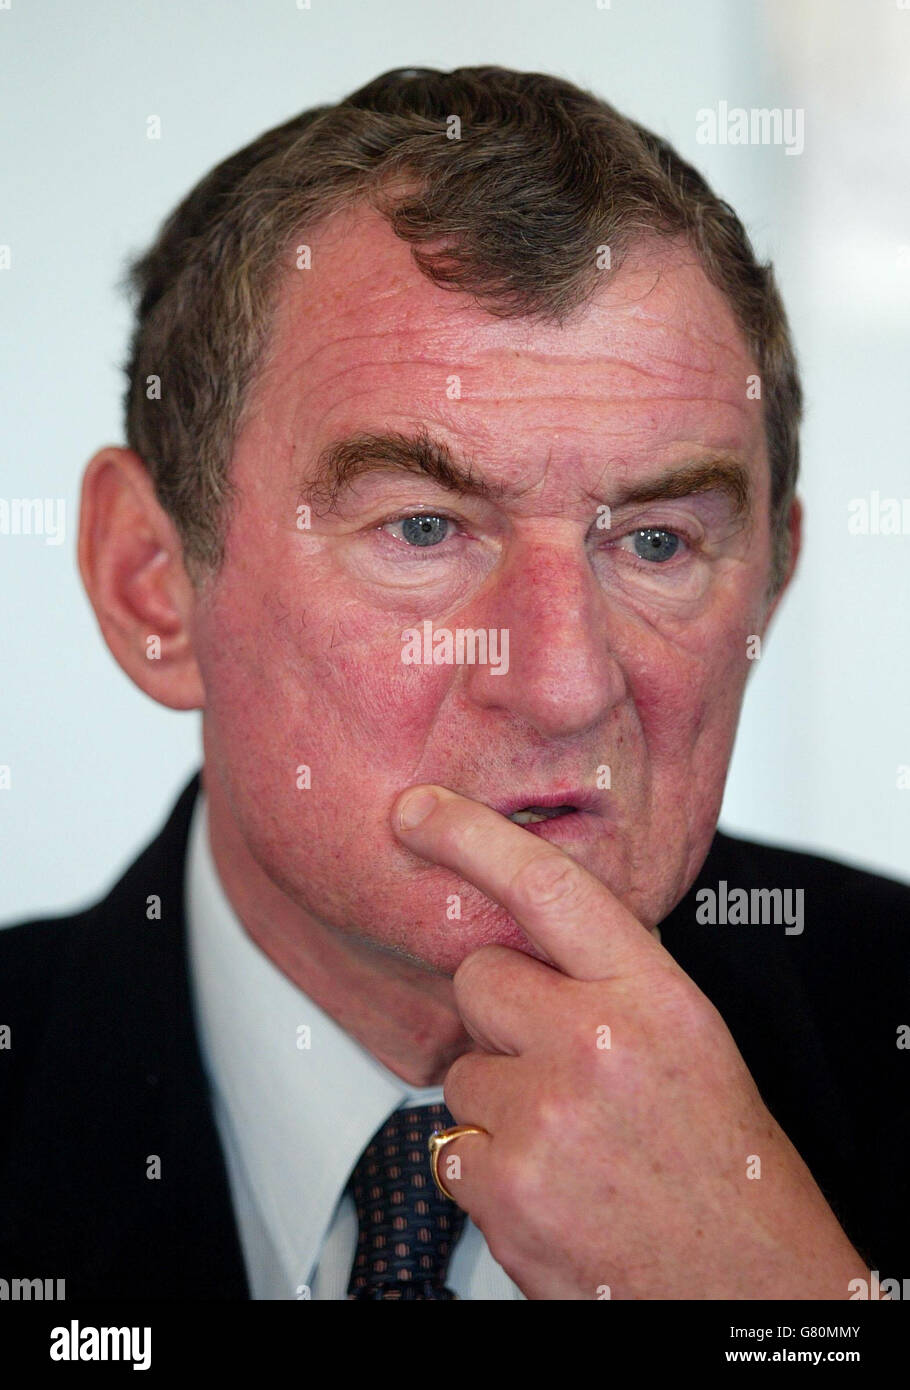 David Pleat, who has joined with Portsmouth in a consultancy role, speaks during a press conference. Stock Photo